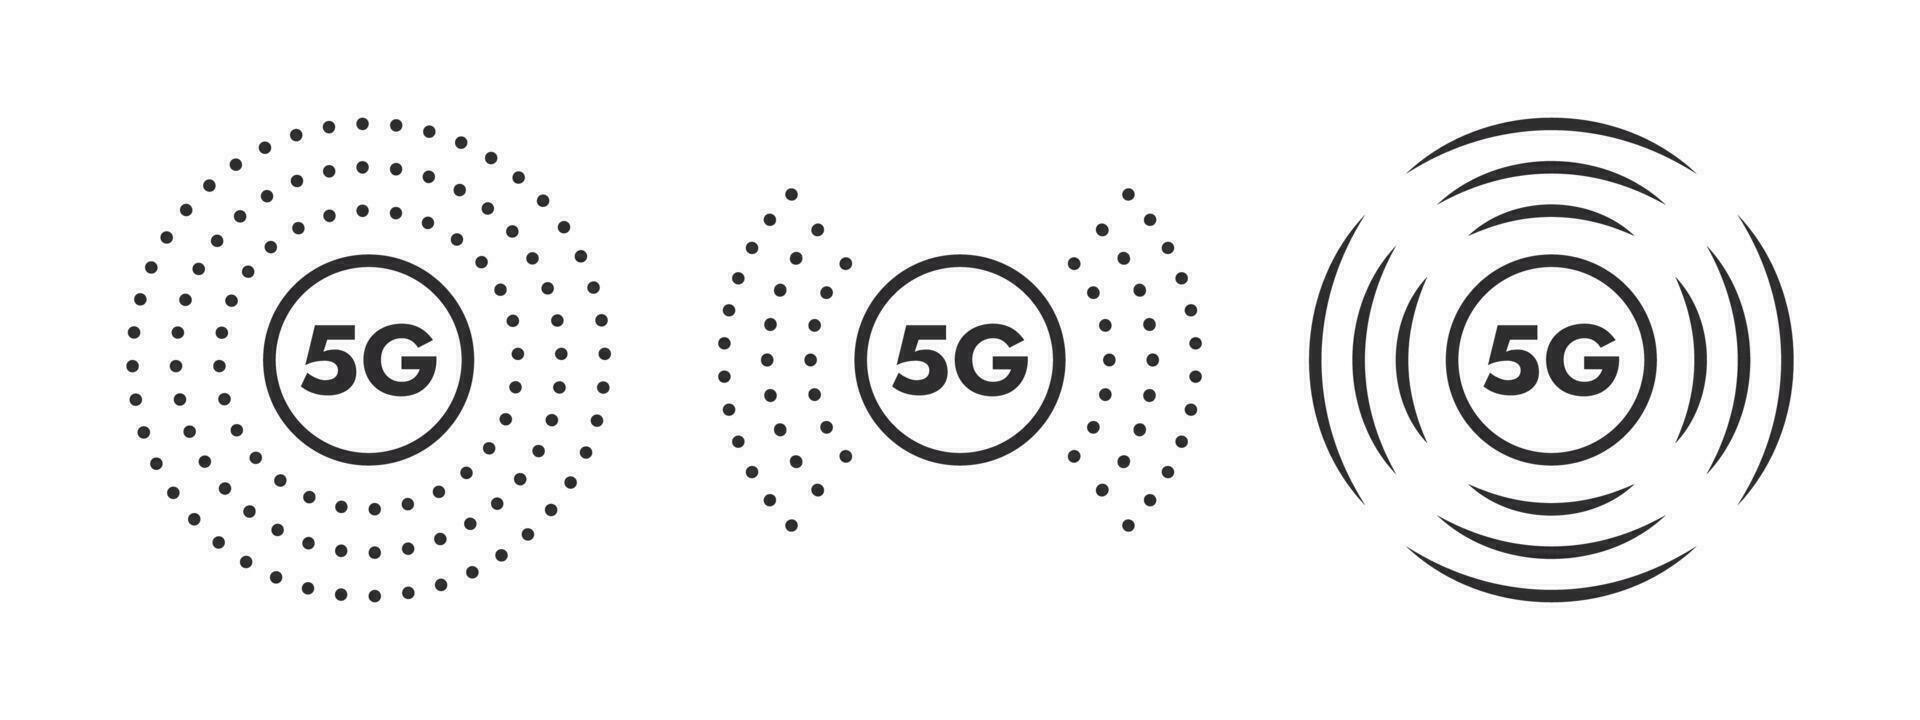 5G network wireless technology icons. Superfast 5G cellular. Vector scalable graphics